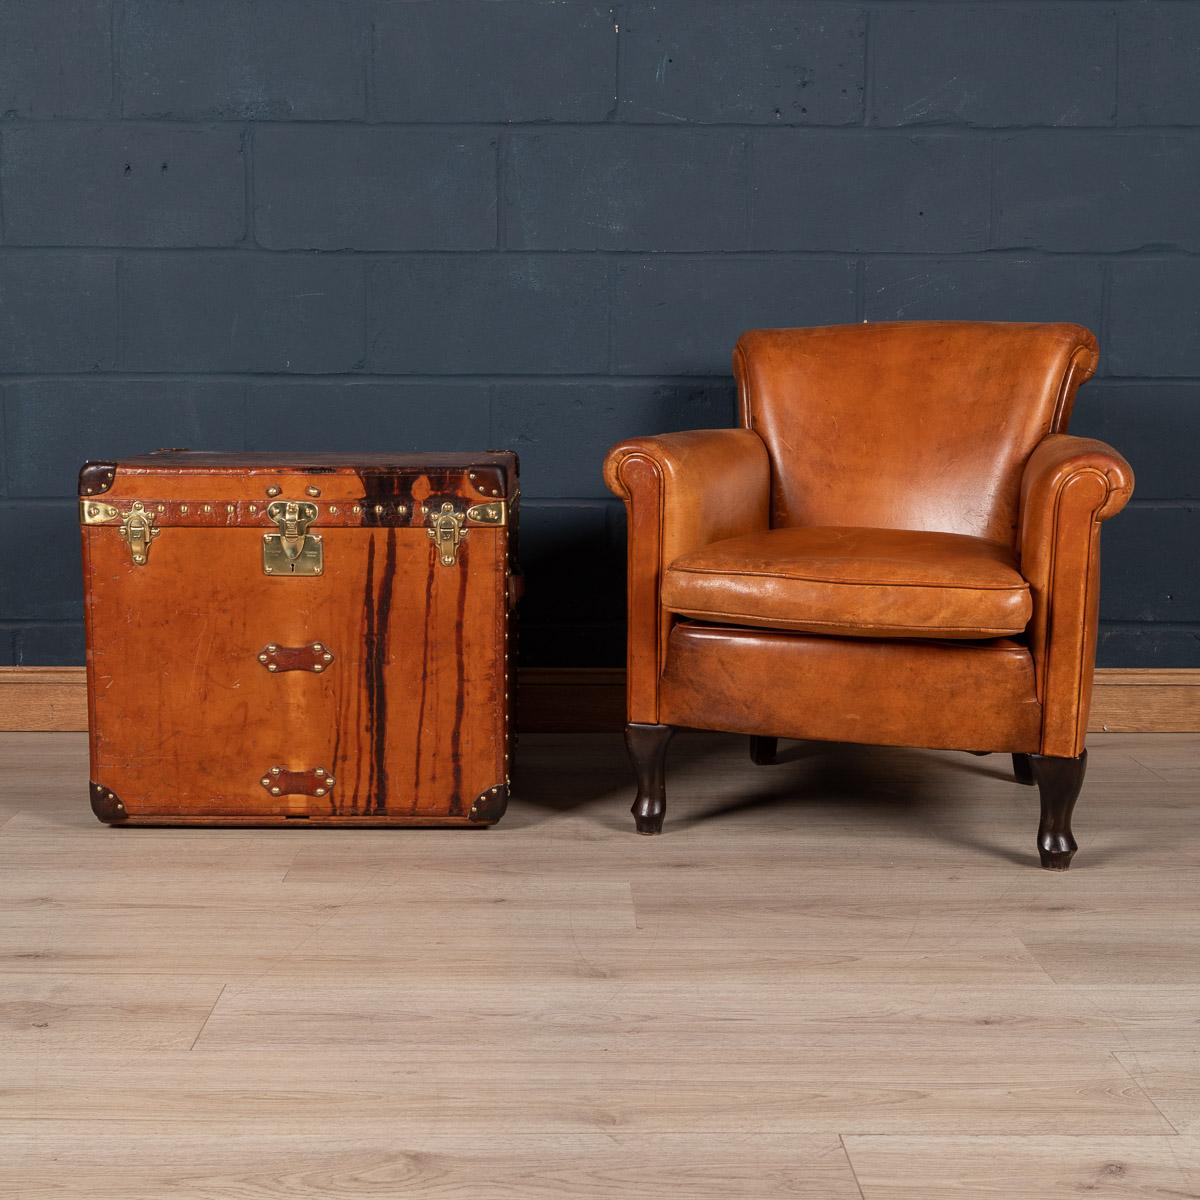 A very rare Louis Vuitton hat trunk dating to the early part of the 20th century, covered not in the world famous (but more common) monogram canvas but in a single piece of cow hide. These all-leather trunks were made by special order and Louis